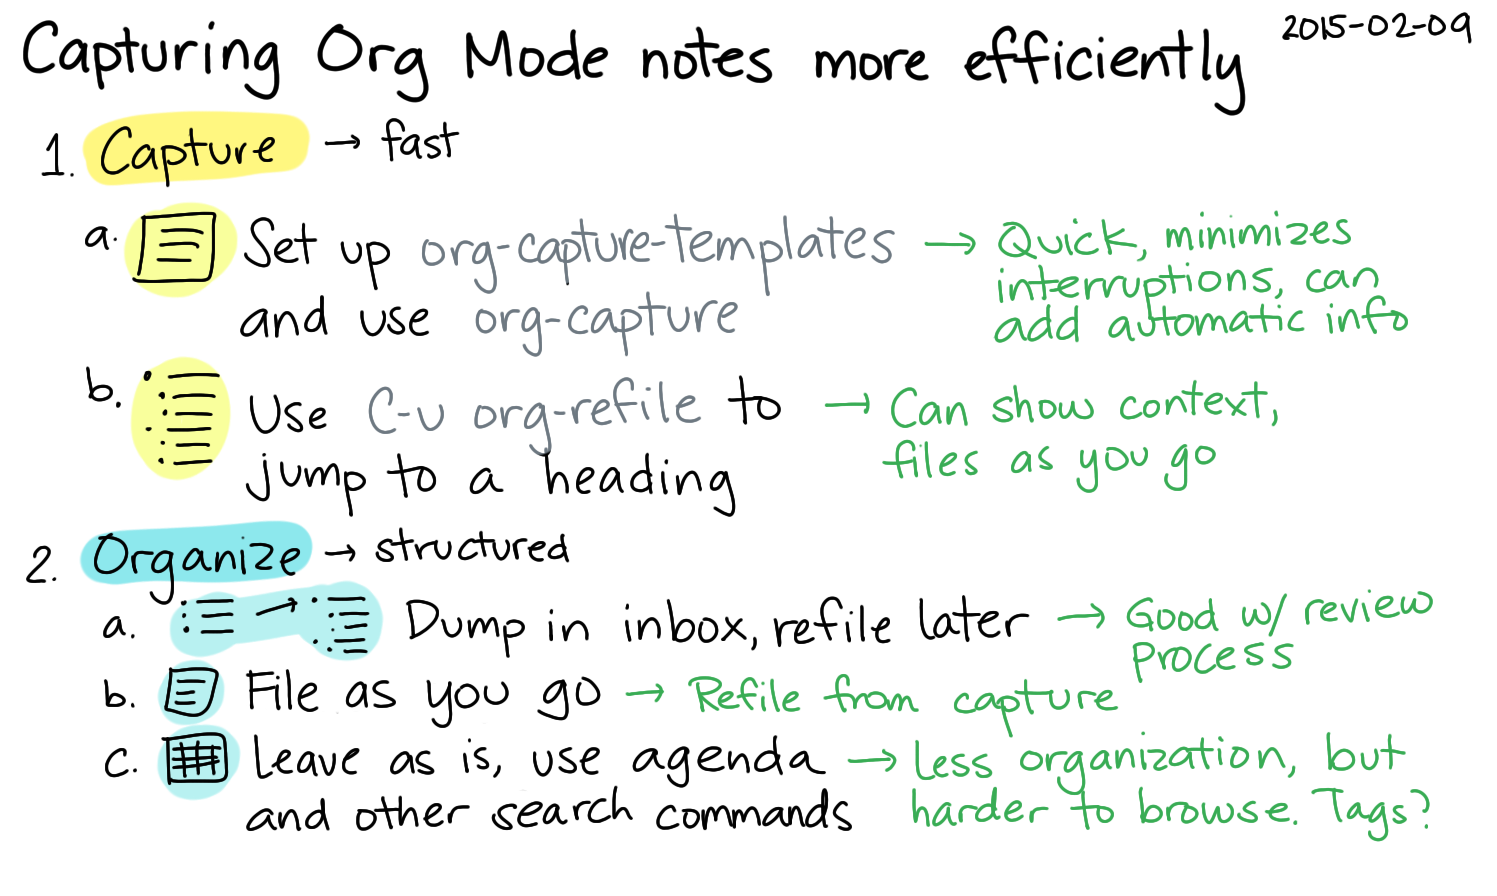 2015-02-09 Capturing Org Mode notes more efficiently -- index card #emacs #org #capture #refile